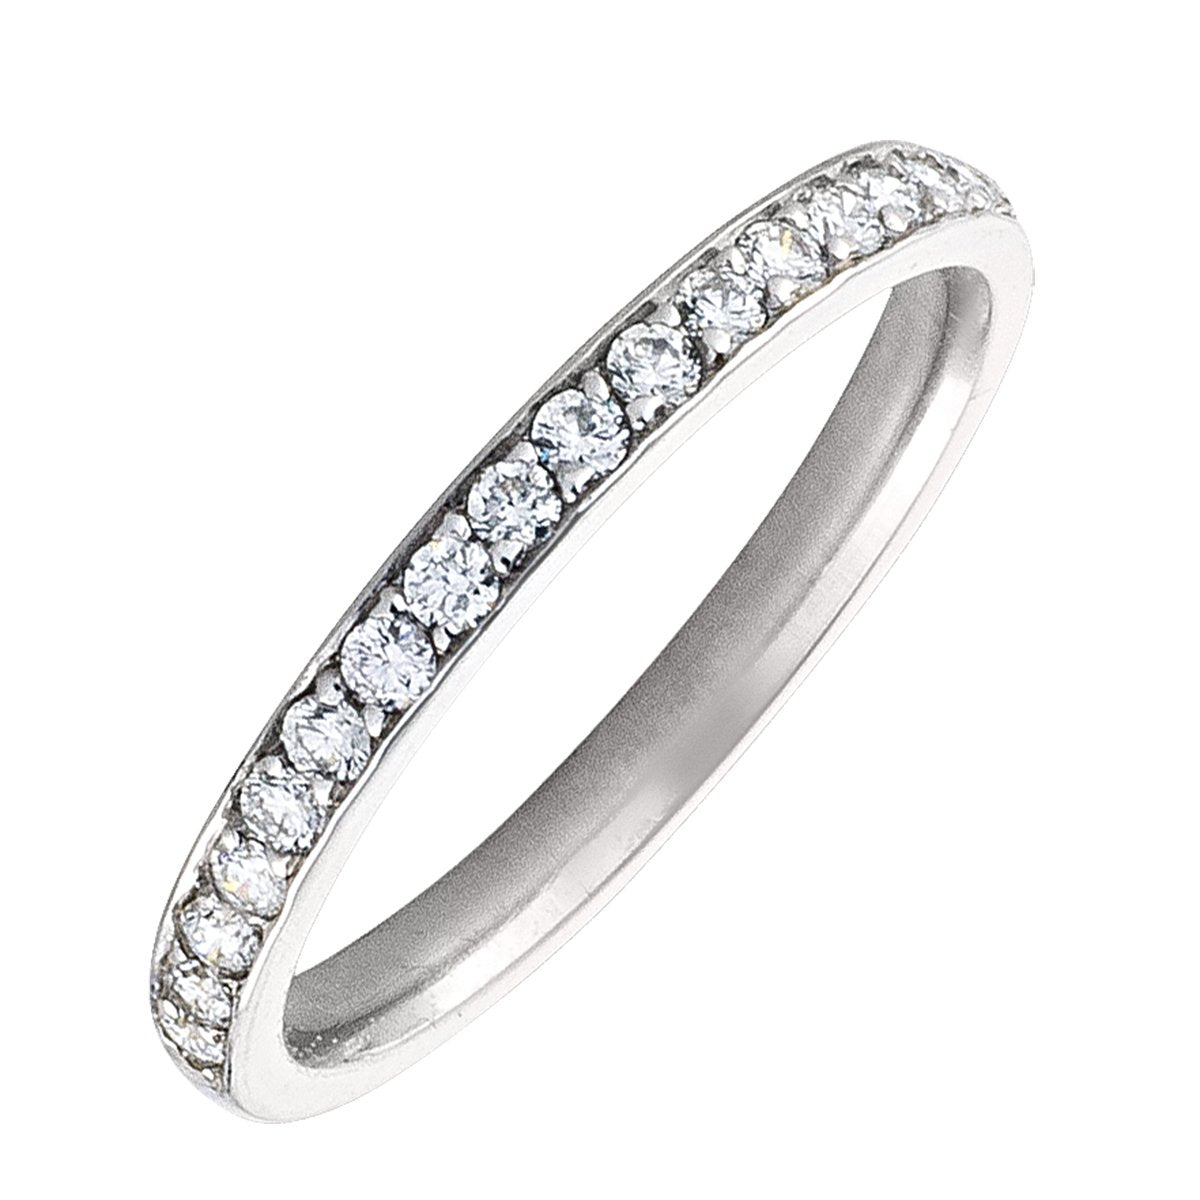 WHITE GOLD DIAMOND PAVE HALF ETERNITY BAND  (AVAILABE IN VARIOUS STONE AND RING SIZE).